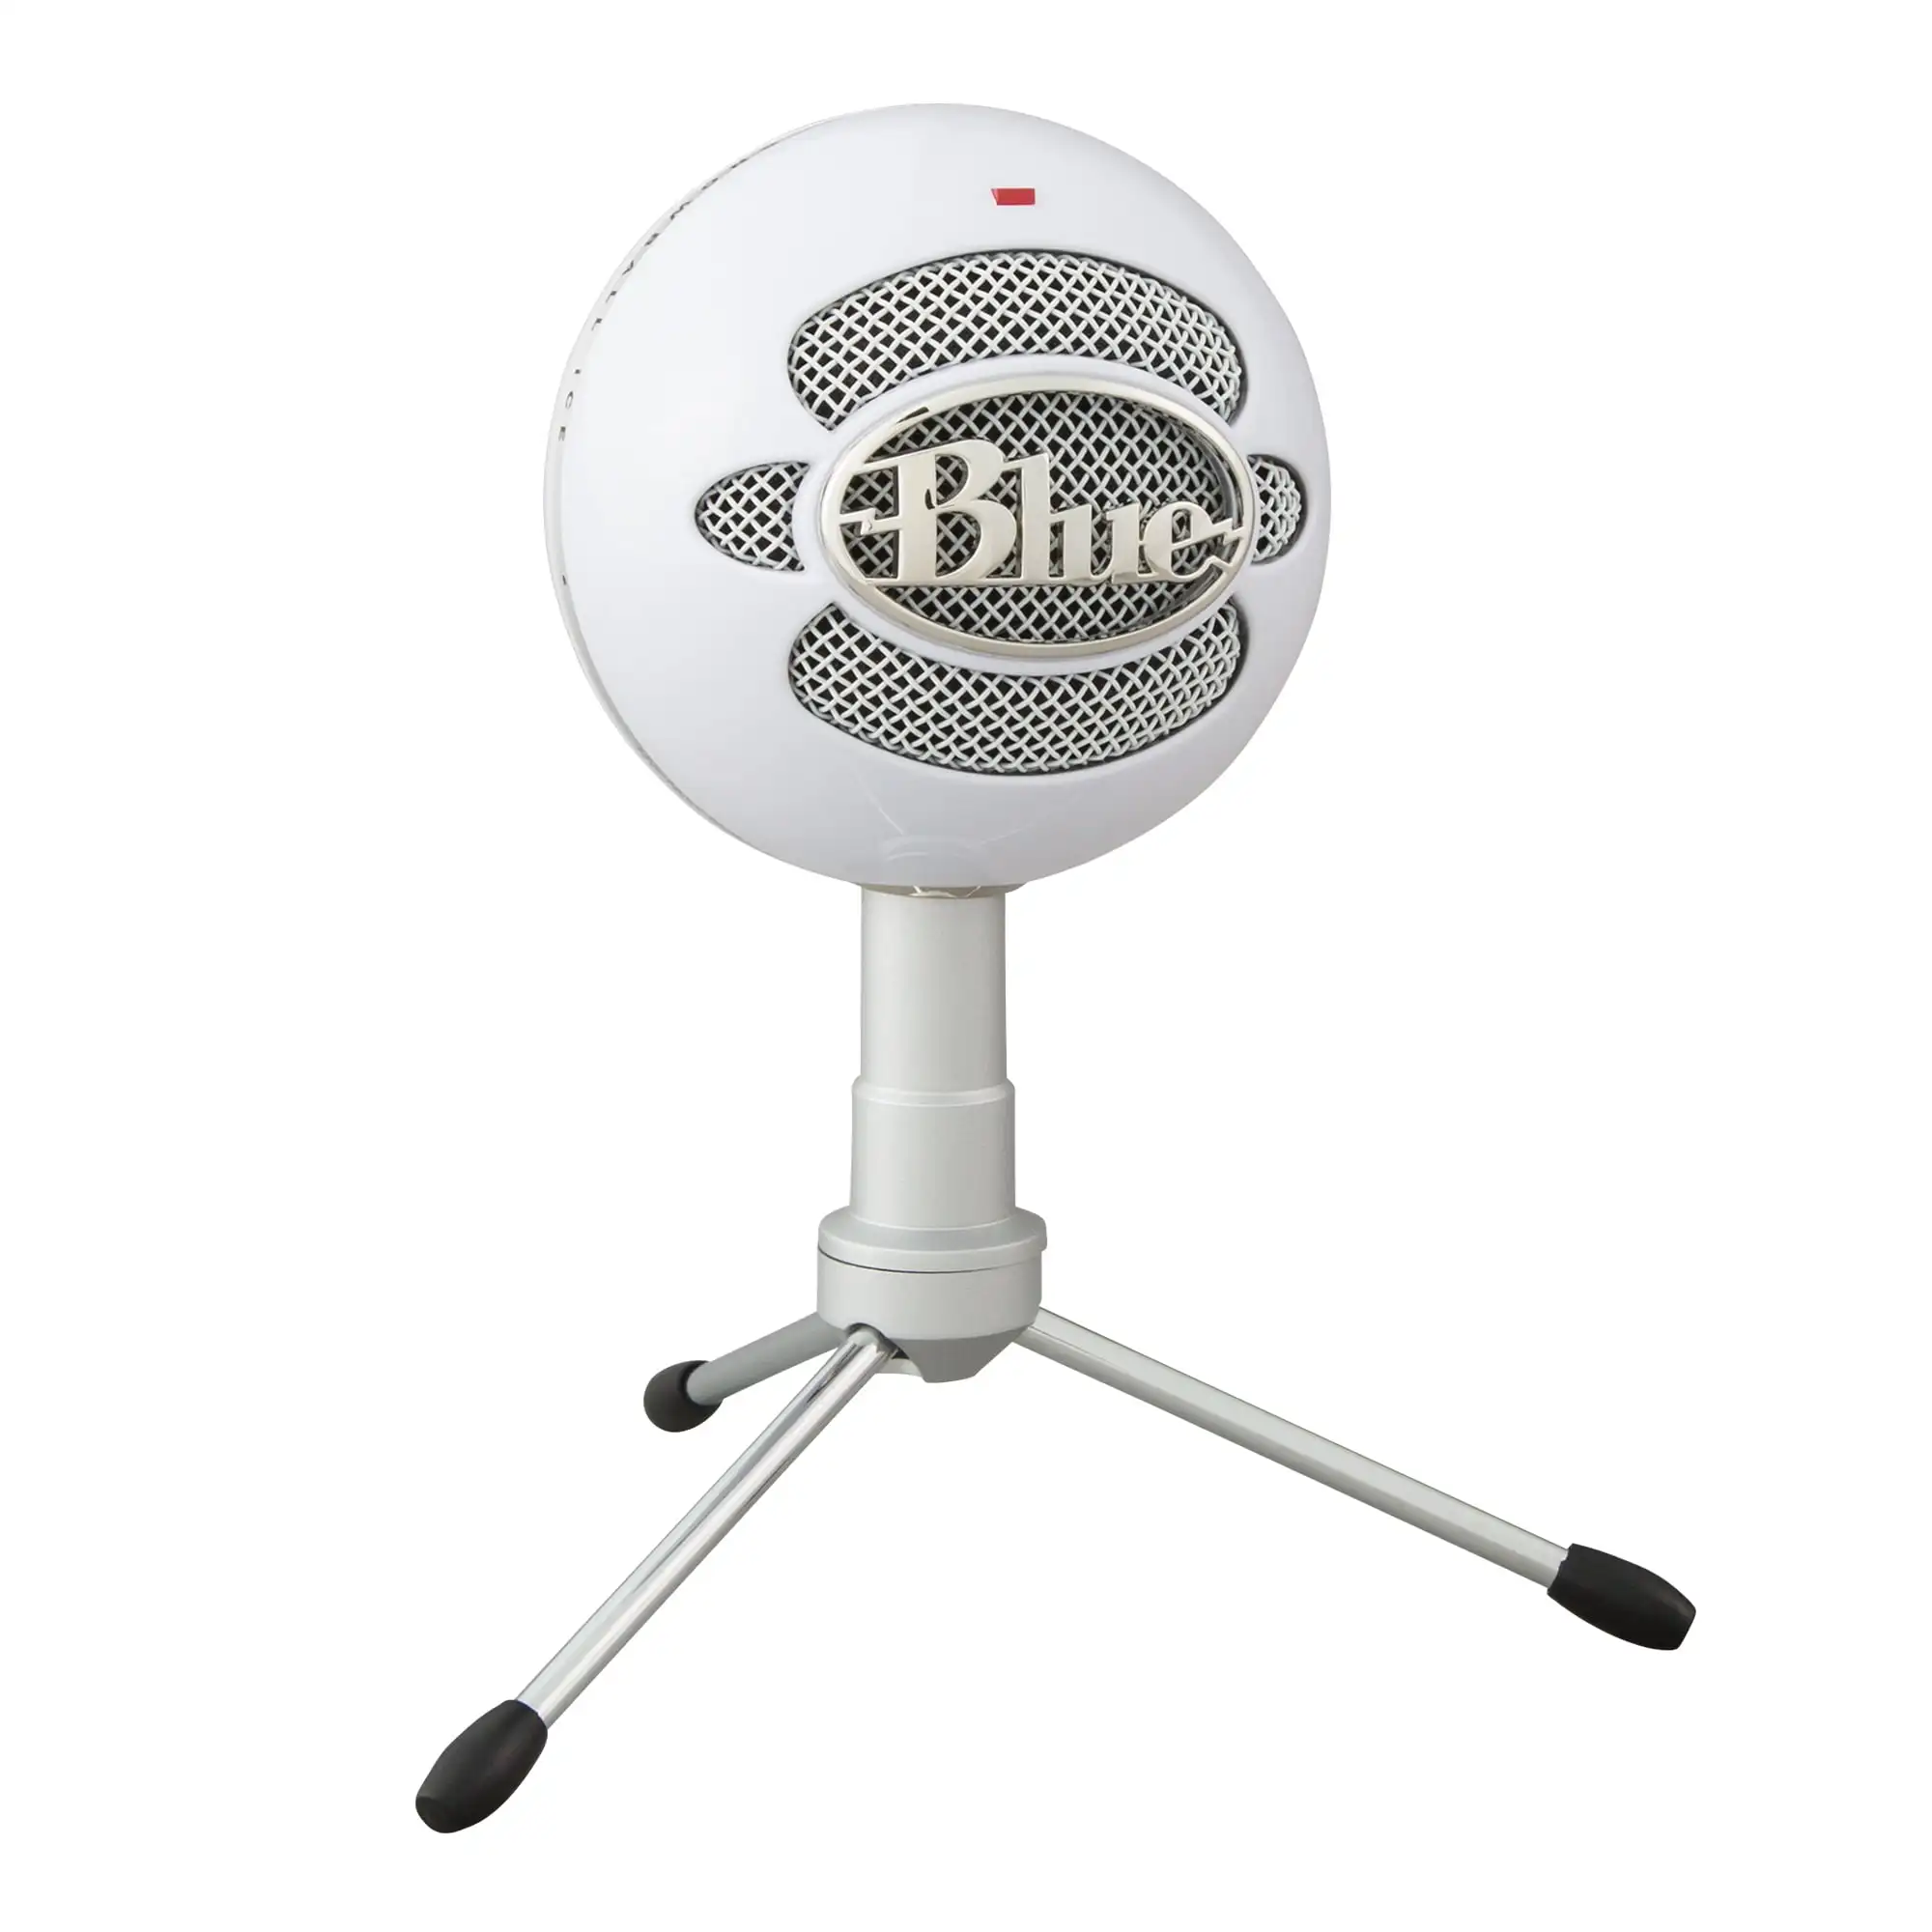 Plug 'n Play USB Microphone for Recording, Streaming, Podcasting, Gaming on PC, Adjustable Desktop Stand and USB cable